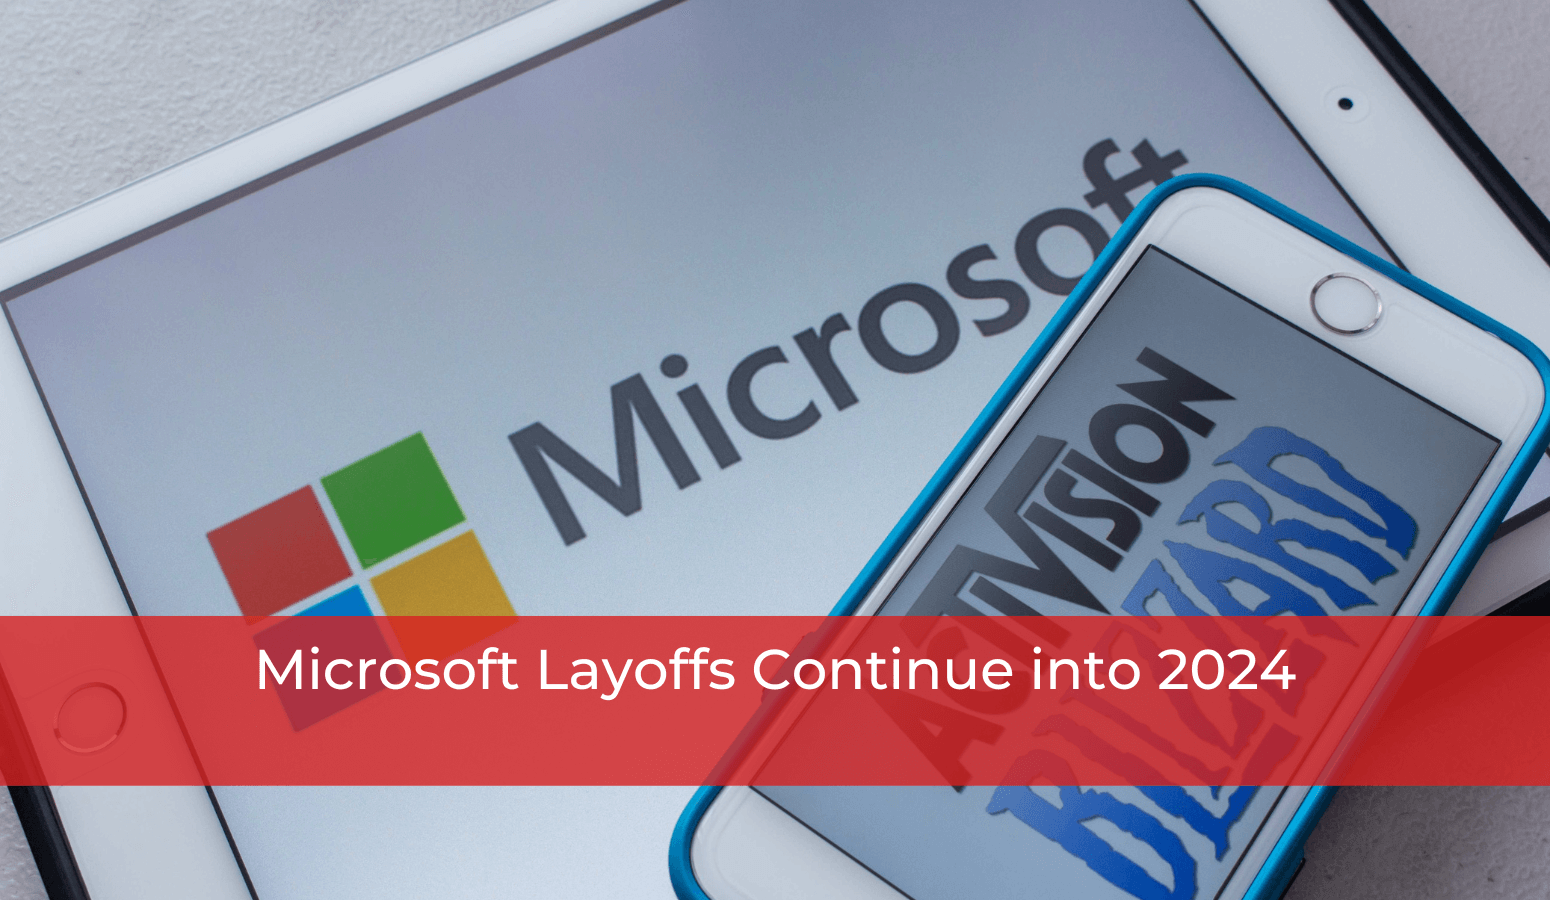 Featured image for “Microsoft Layoffs Continue into 2024”